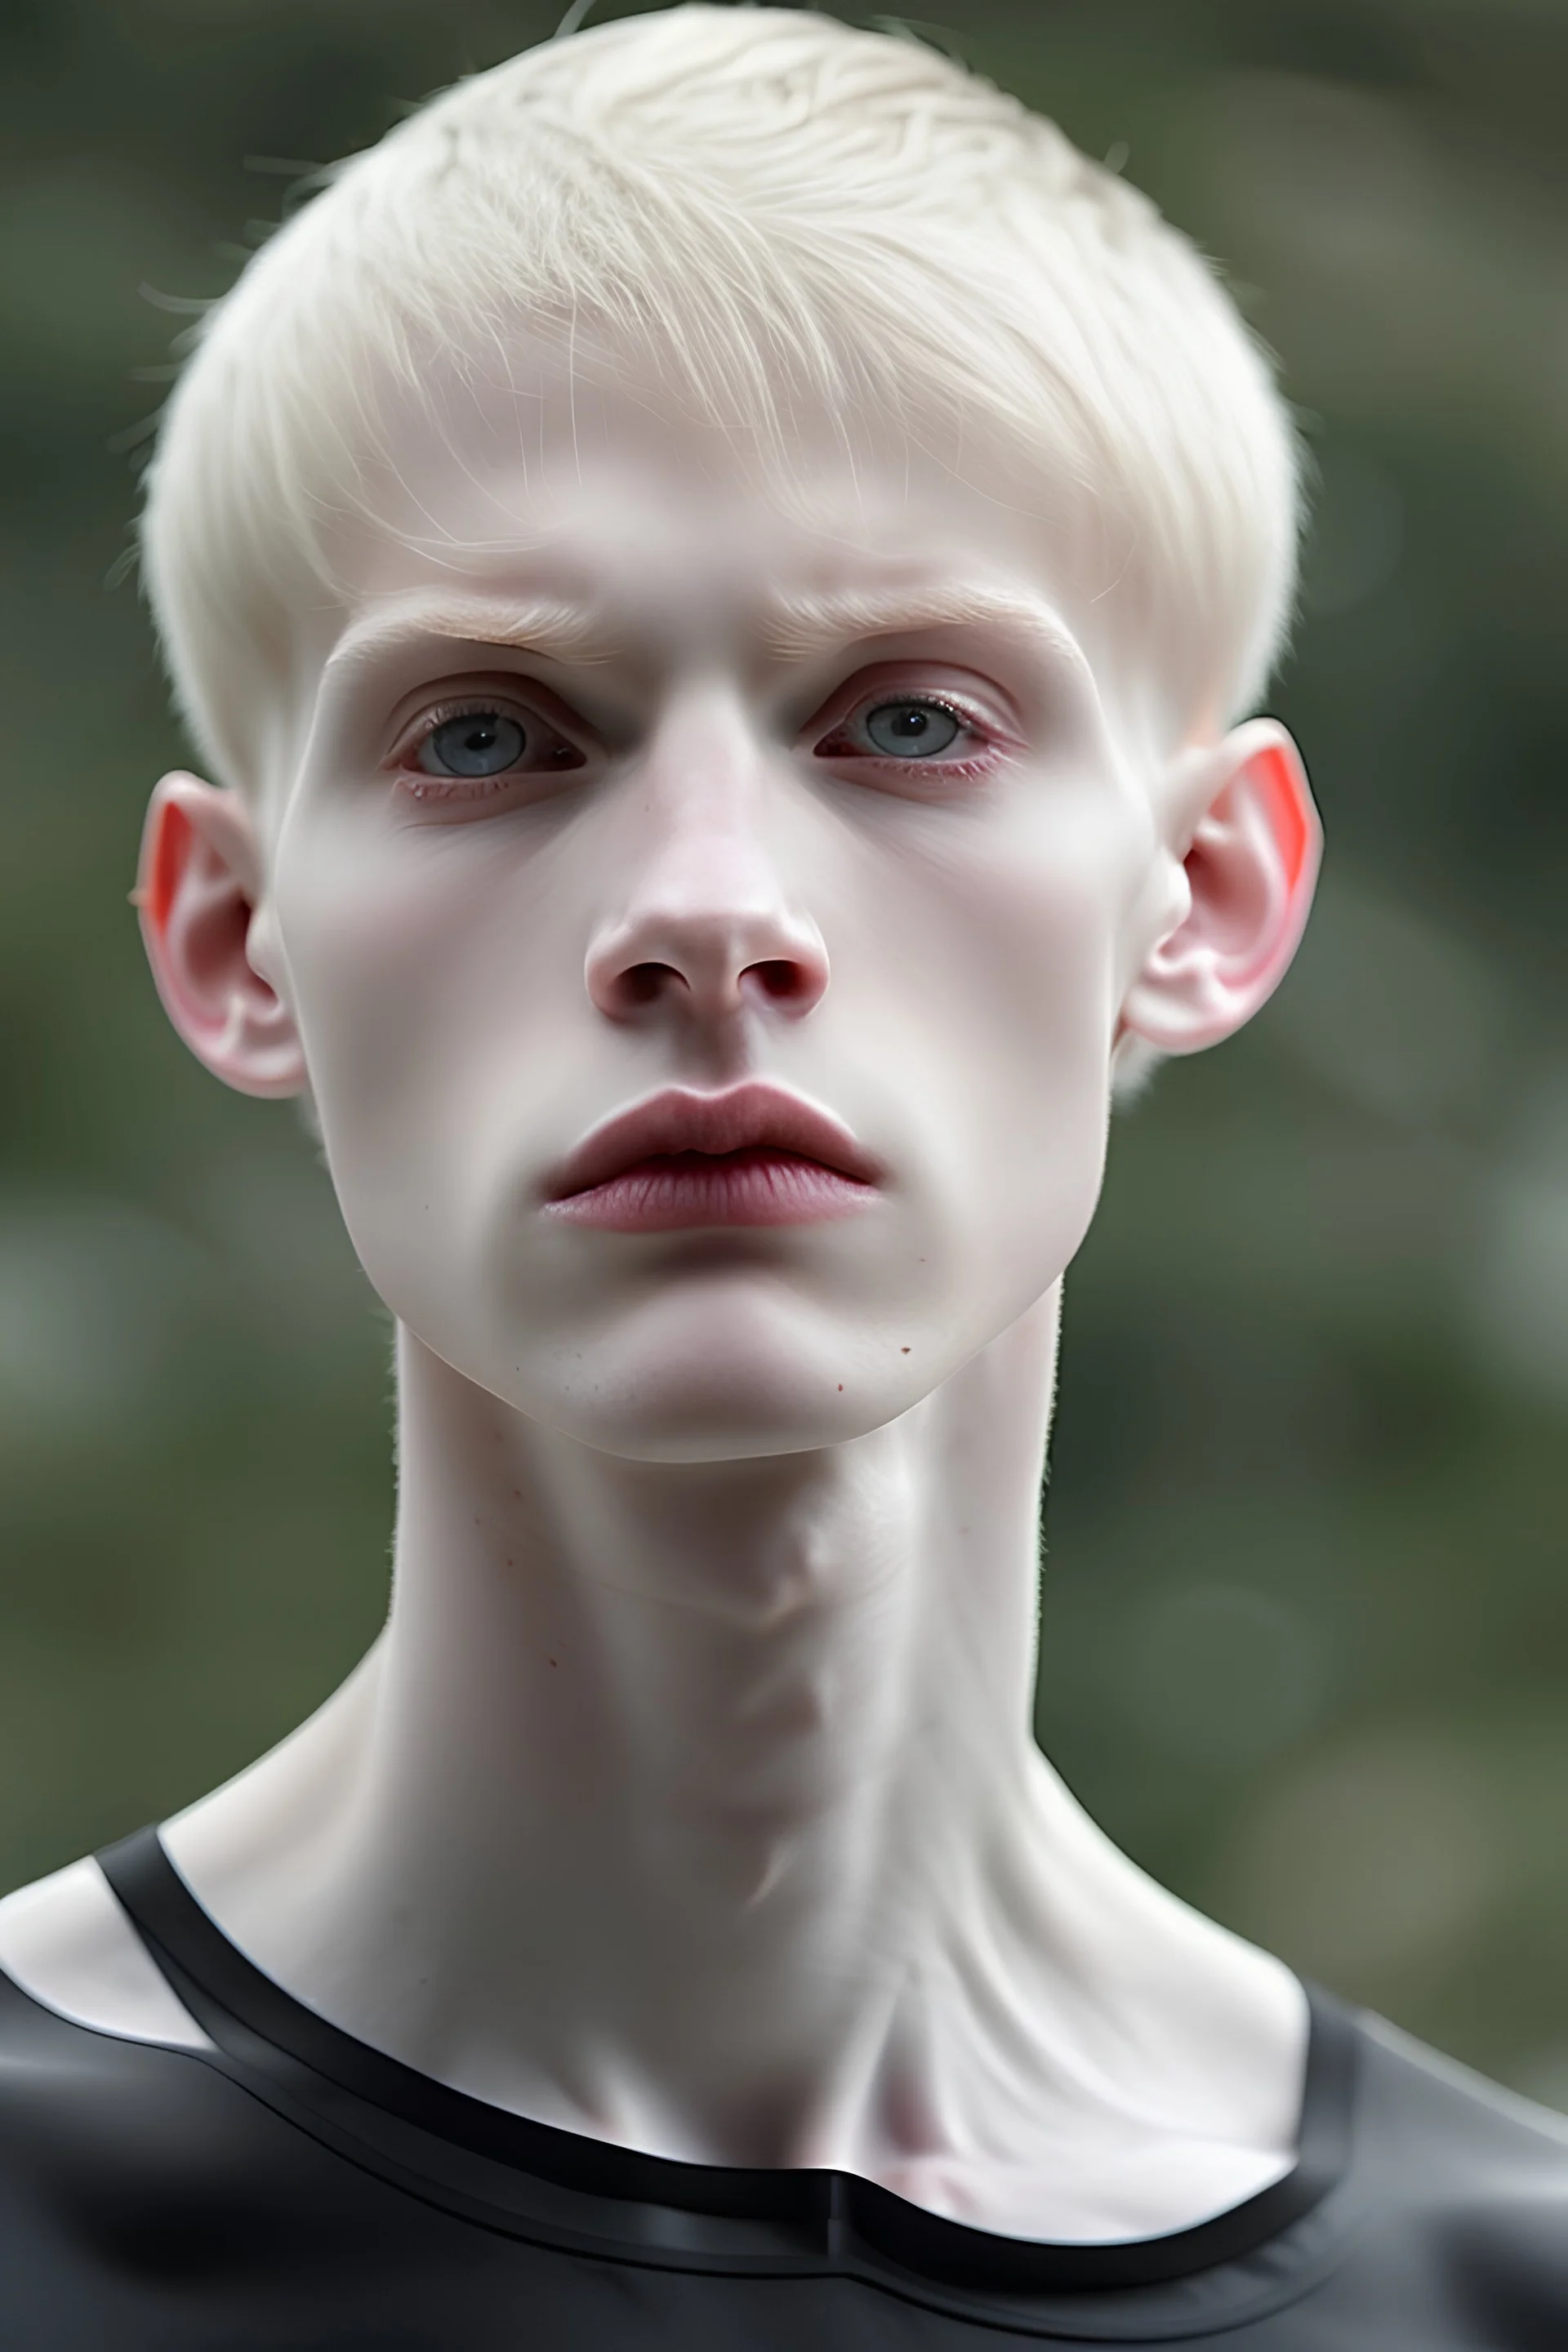 pale skin tone, black hair in a longish bowl cut with whisps in front of his ears, face is thin with high cheekbones and deep blue eyes. lean build that suggests he doesn't engage in a lot of physical activity. He is of average attractiveness with a boyish face.